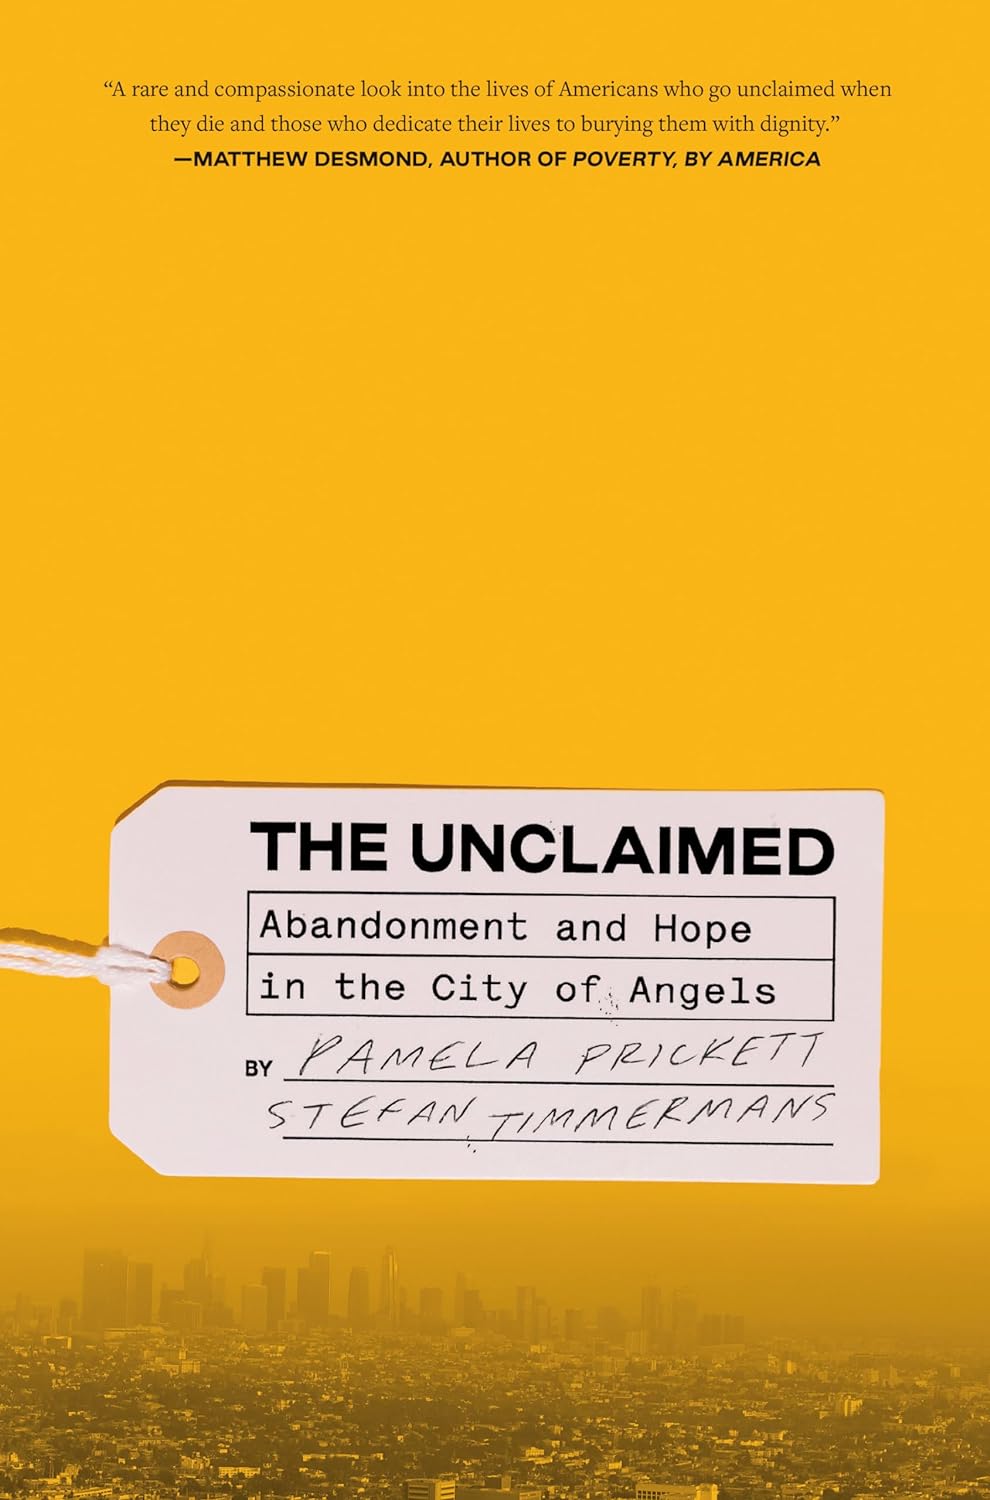 Pamela Prickett and Stefan Timmermans, <em><a href="https://bookshop.org/a/132/9780593239056" target="_blank" rel="noopener">The Unclaimed: Abandonment and Hope in the City of Angels</a></em> (Crown, March 12)